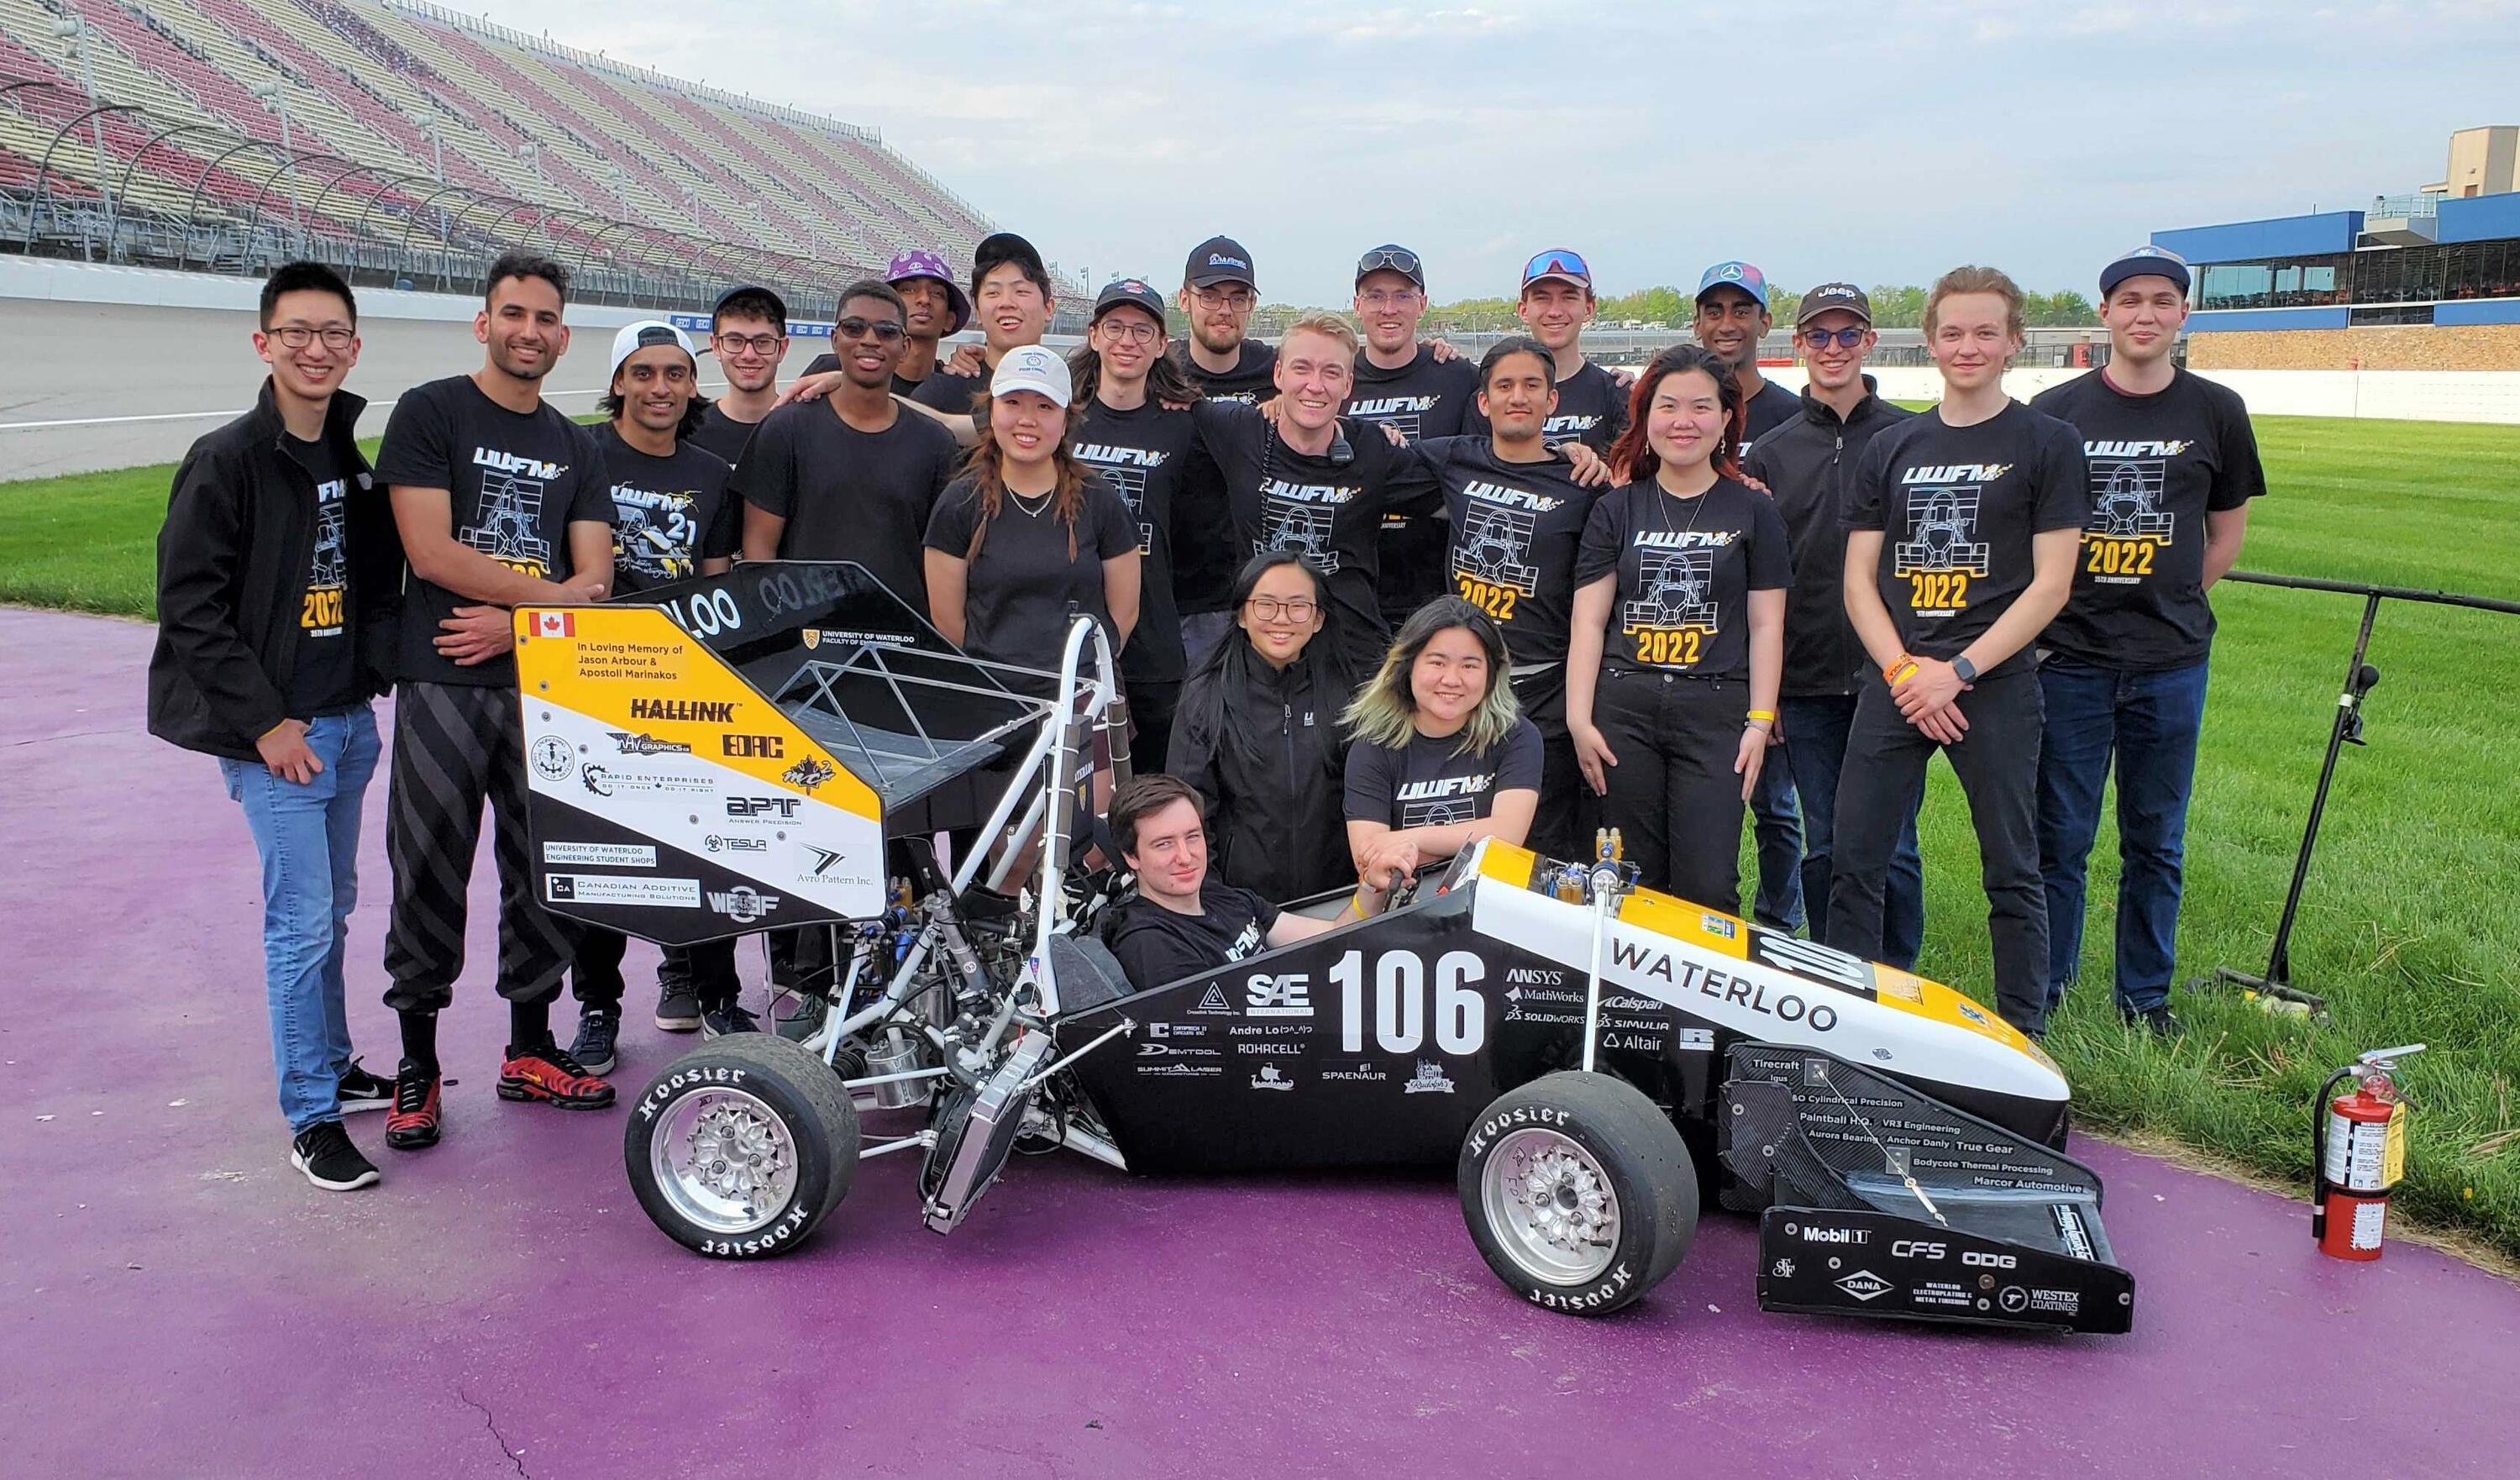 Members of UW Formula Motorsports pose with their car at the Michigan International Speedway.